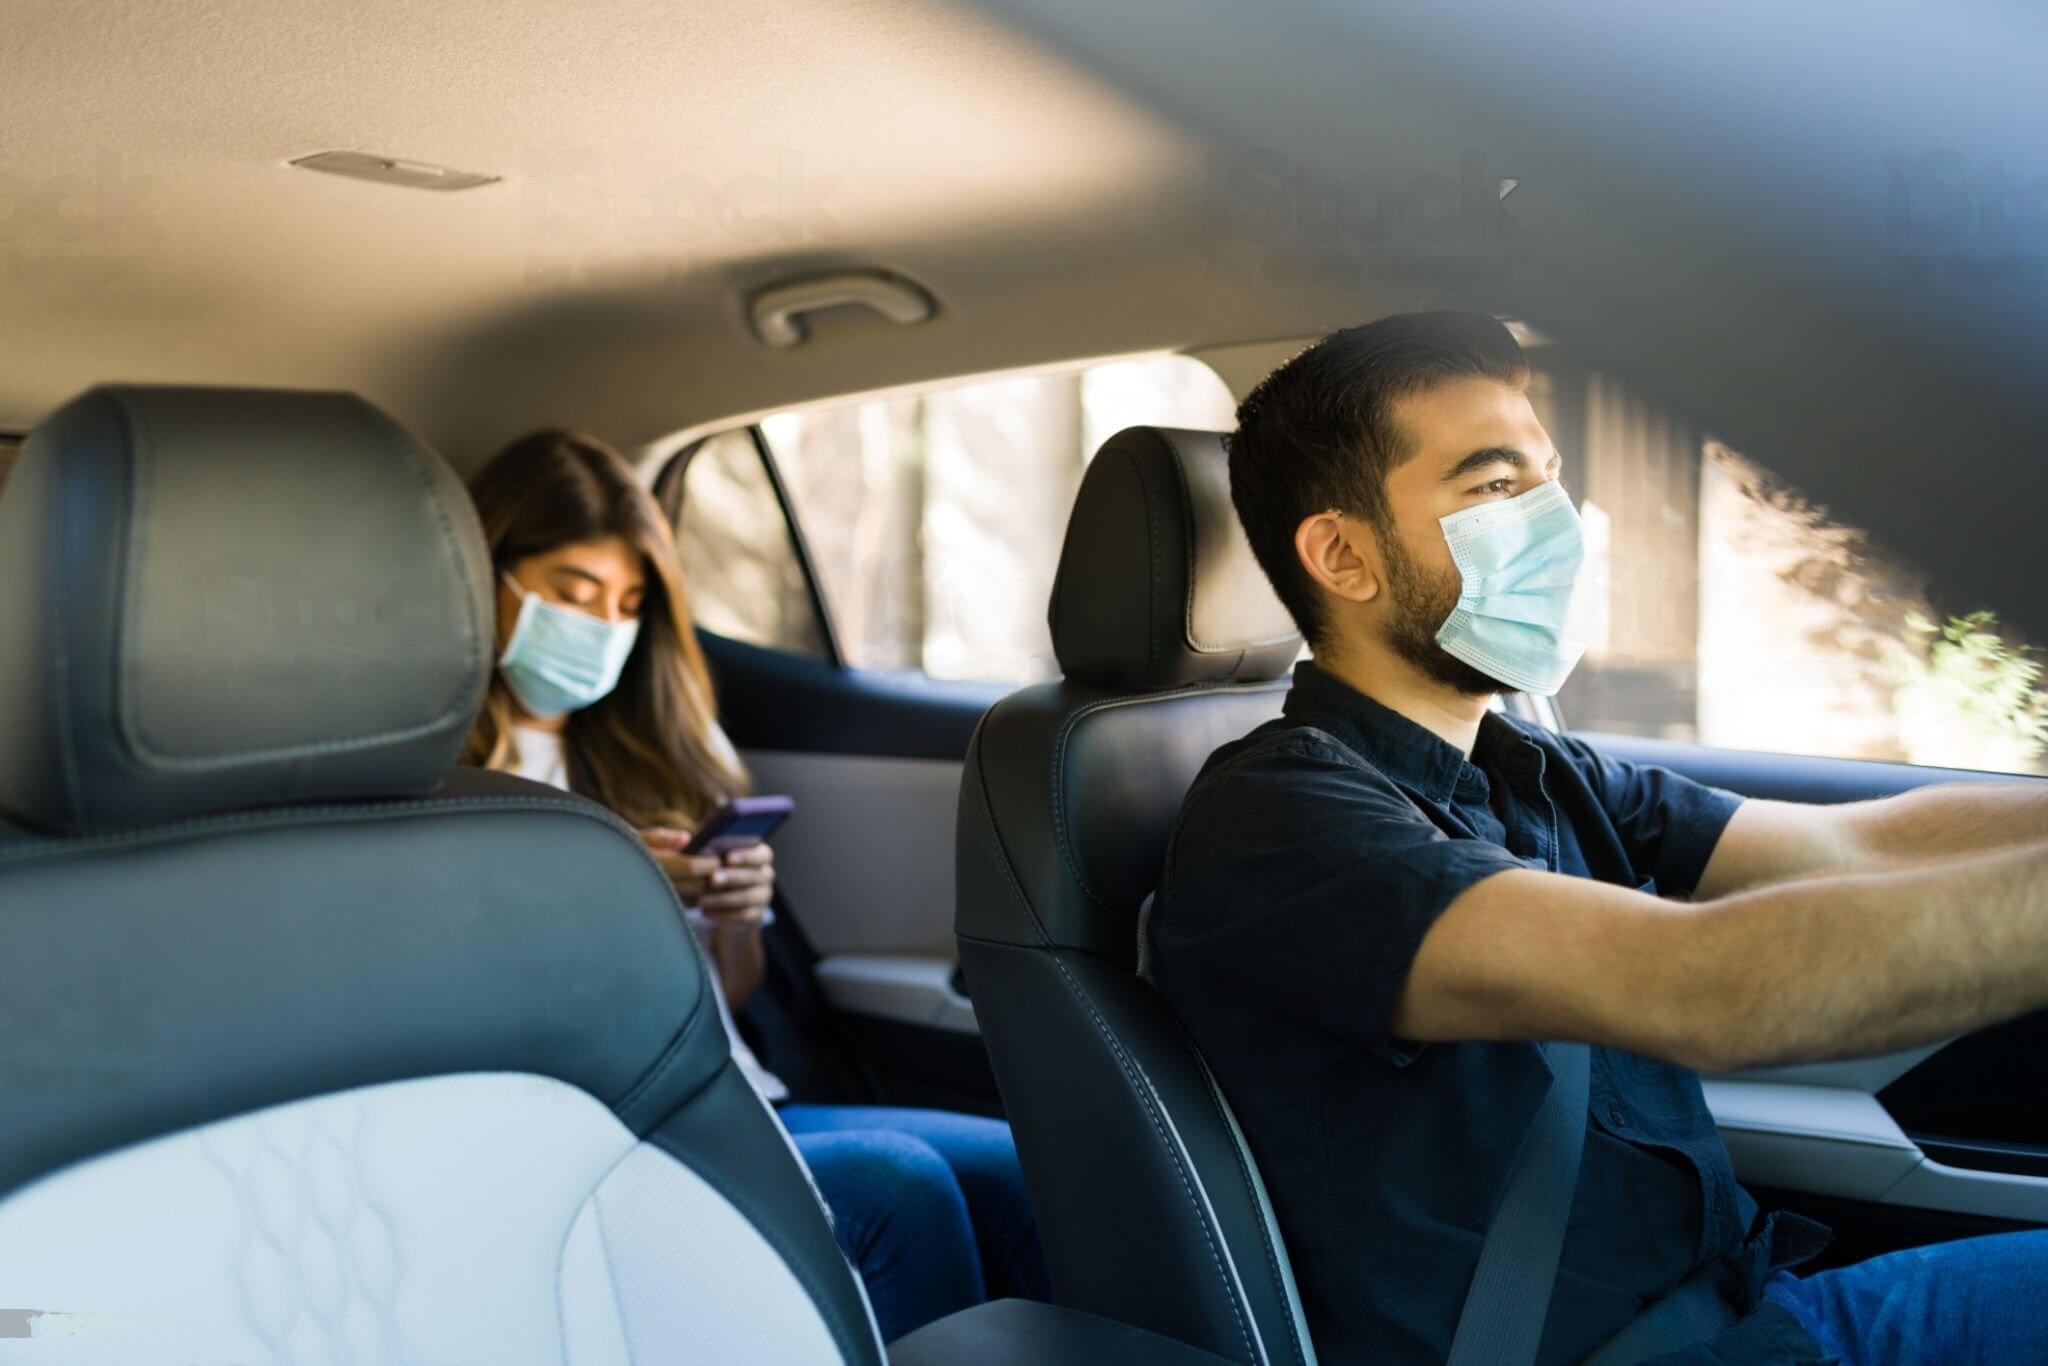 How to claim compensation for an accident in Uber or Lyft